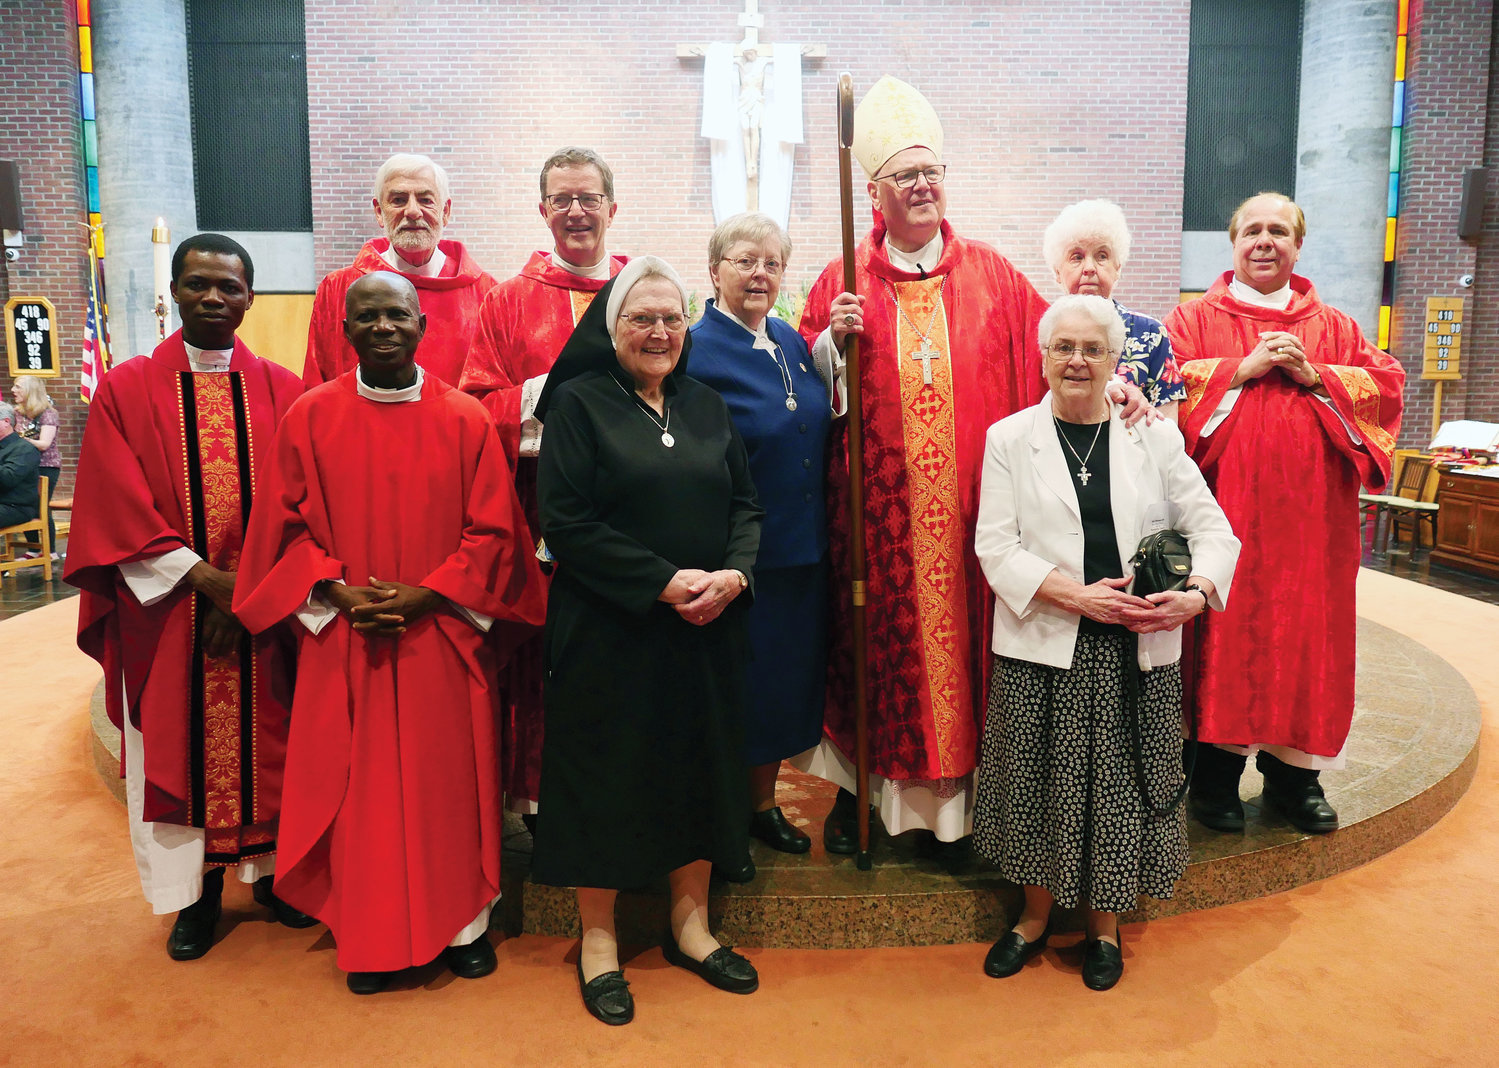 Cardinal Dolan joins, from left, Father John Kwaku Sah, parochial vicar; Father Andrew Amankwaa; Deacon Anthony Ferraiuolo; Father Rees Doughty, pastor; Sister Mary McCaffrey, O.S.F.; Sister Helen Hofmann, O.S.F.; Sister Barbara Ann Sansone, O.S.F.; Sister Rose Jerome Kenlon, O.S.F.; and Deacon Lenny Farmer. The Orange County parish is awaiting approval for a name change to St. Marianne Cope.